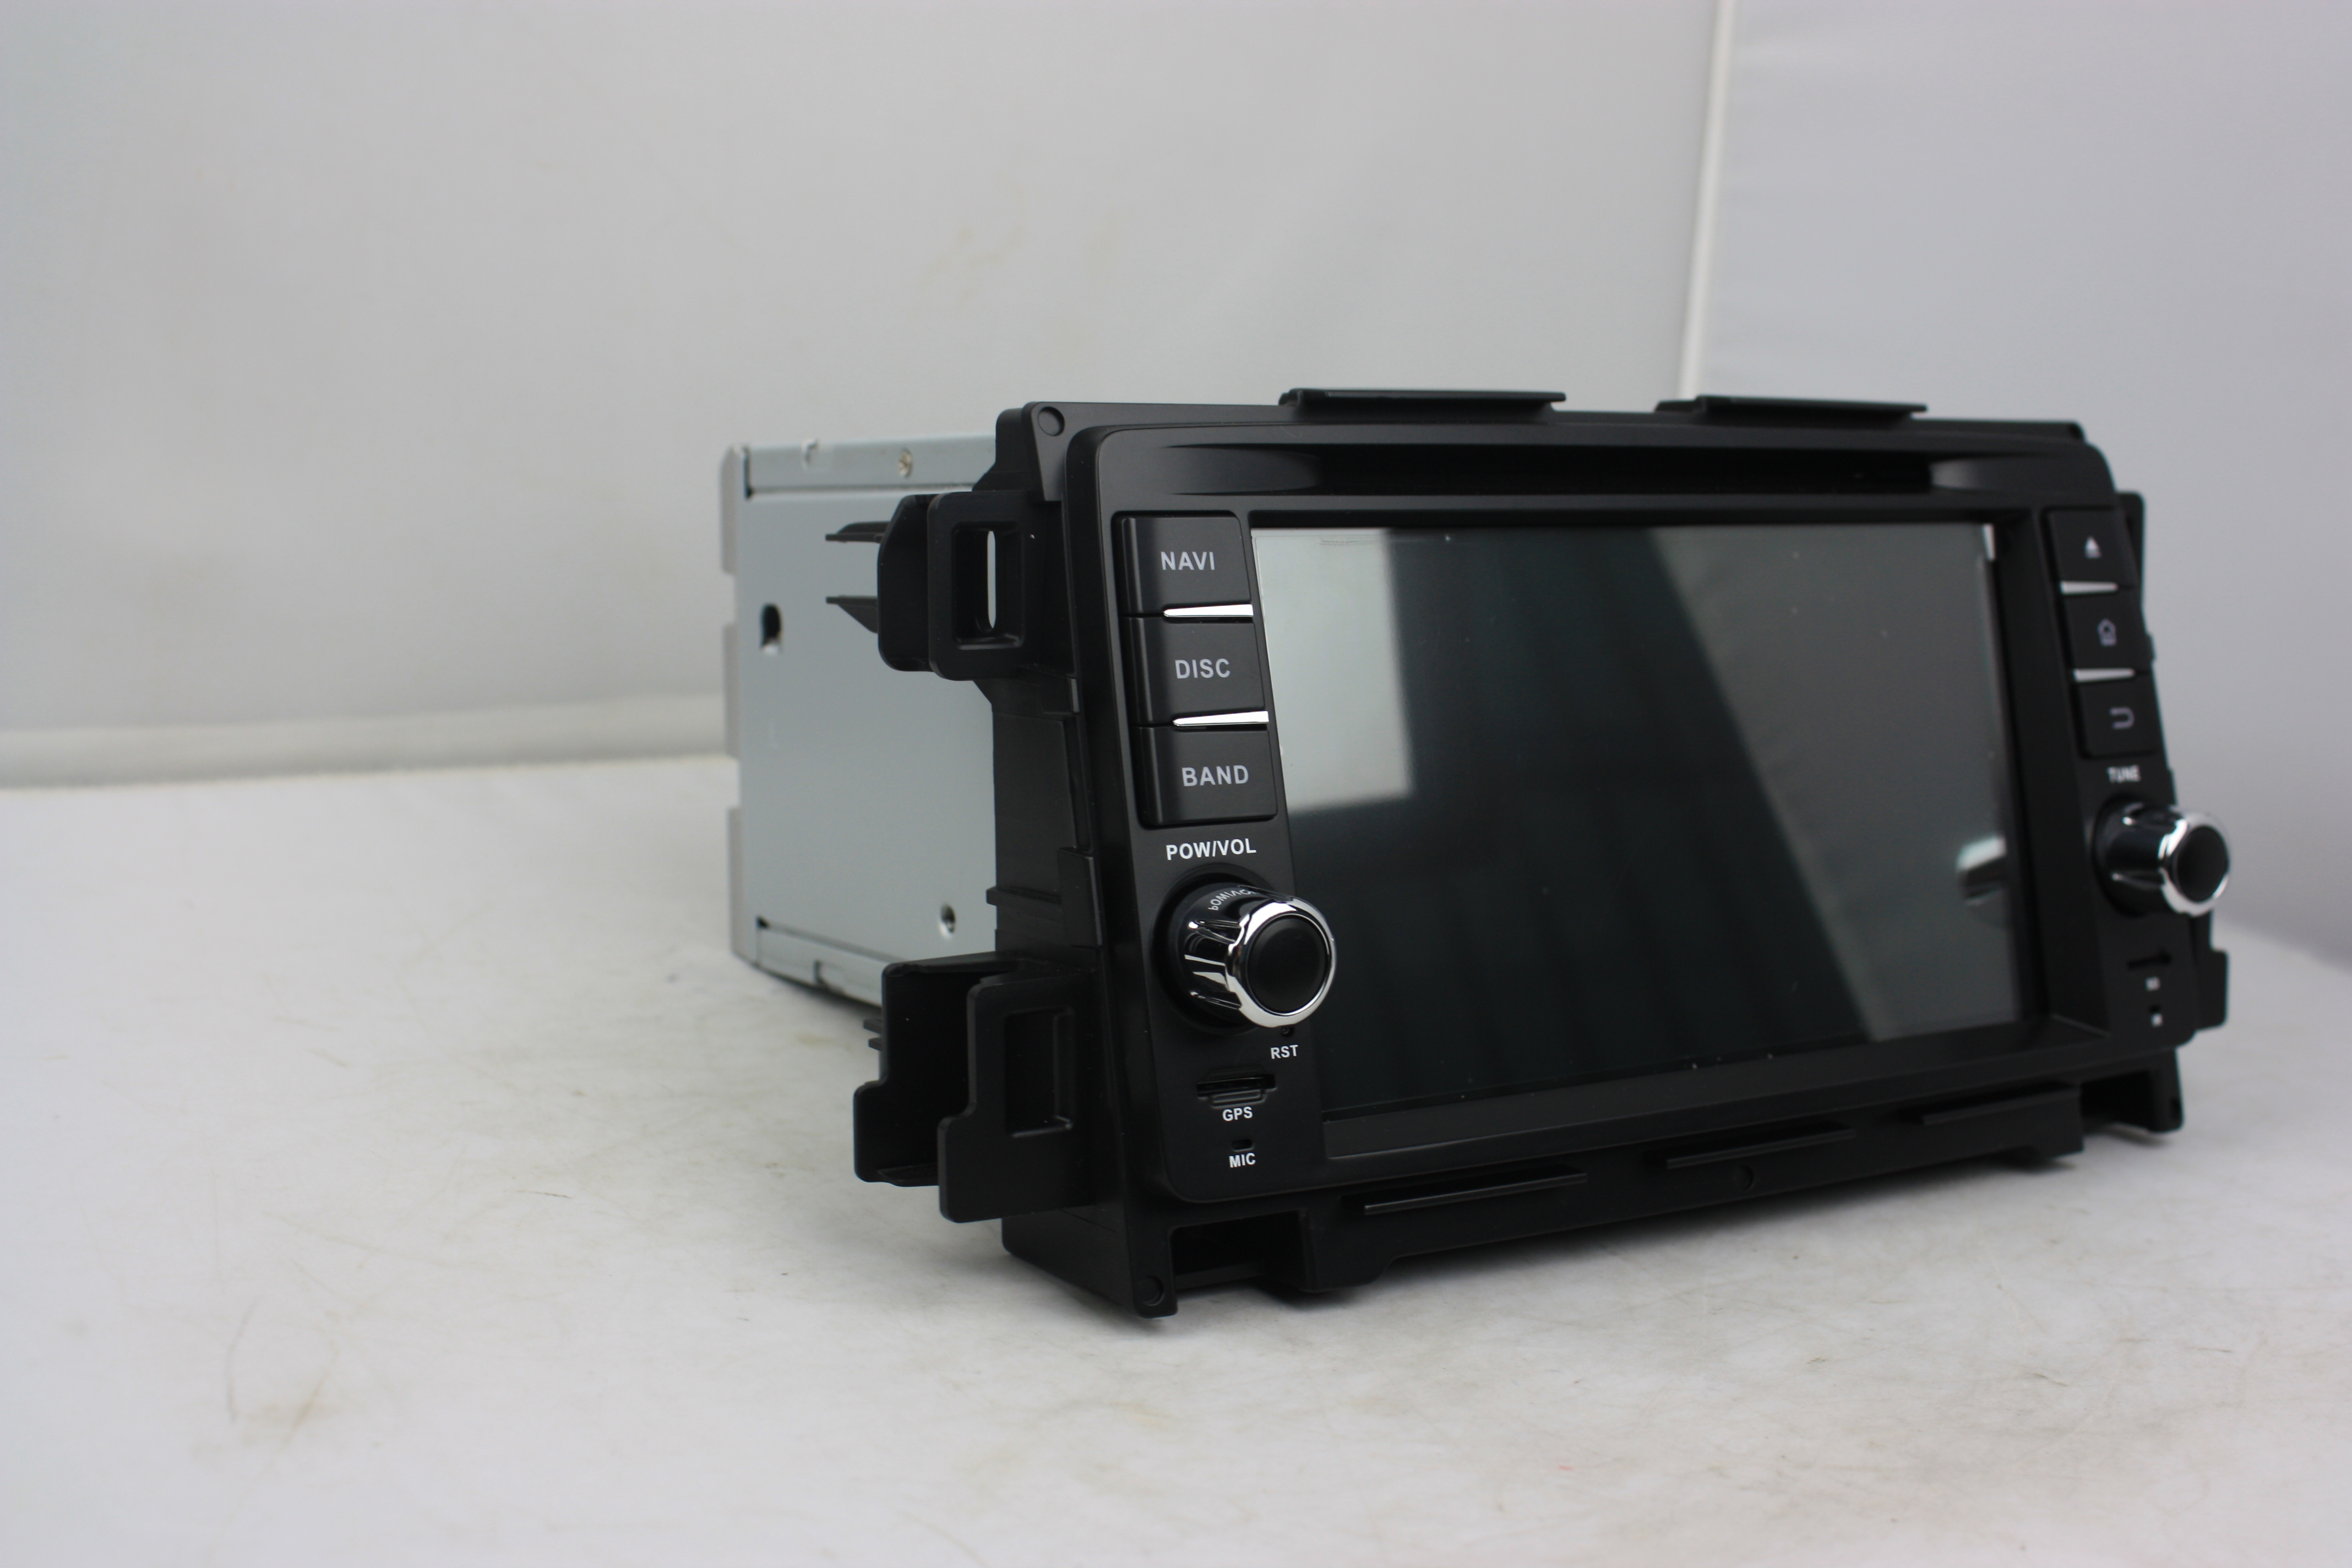 7 inch CX-5 2012-2013 android car DVD player